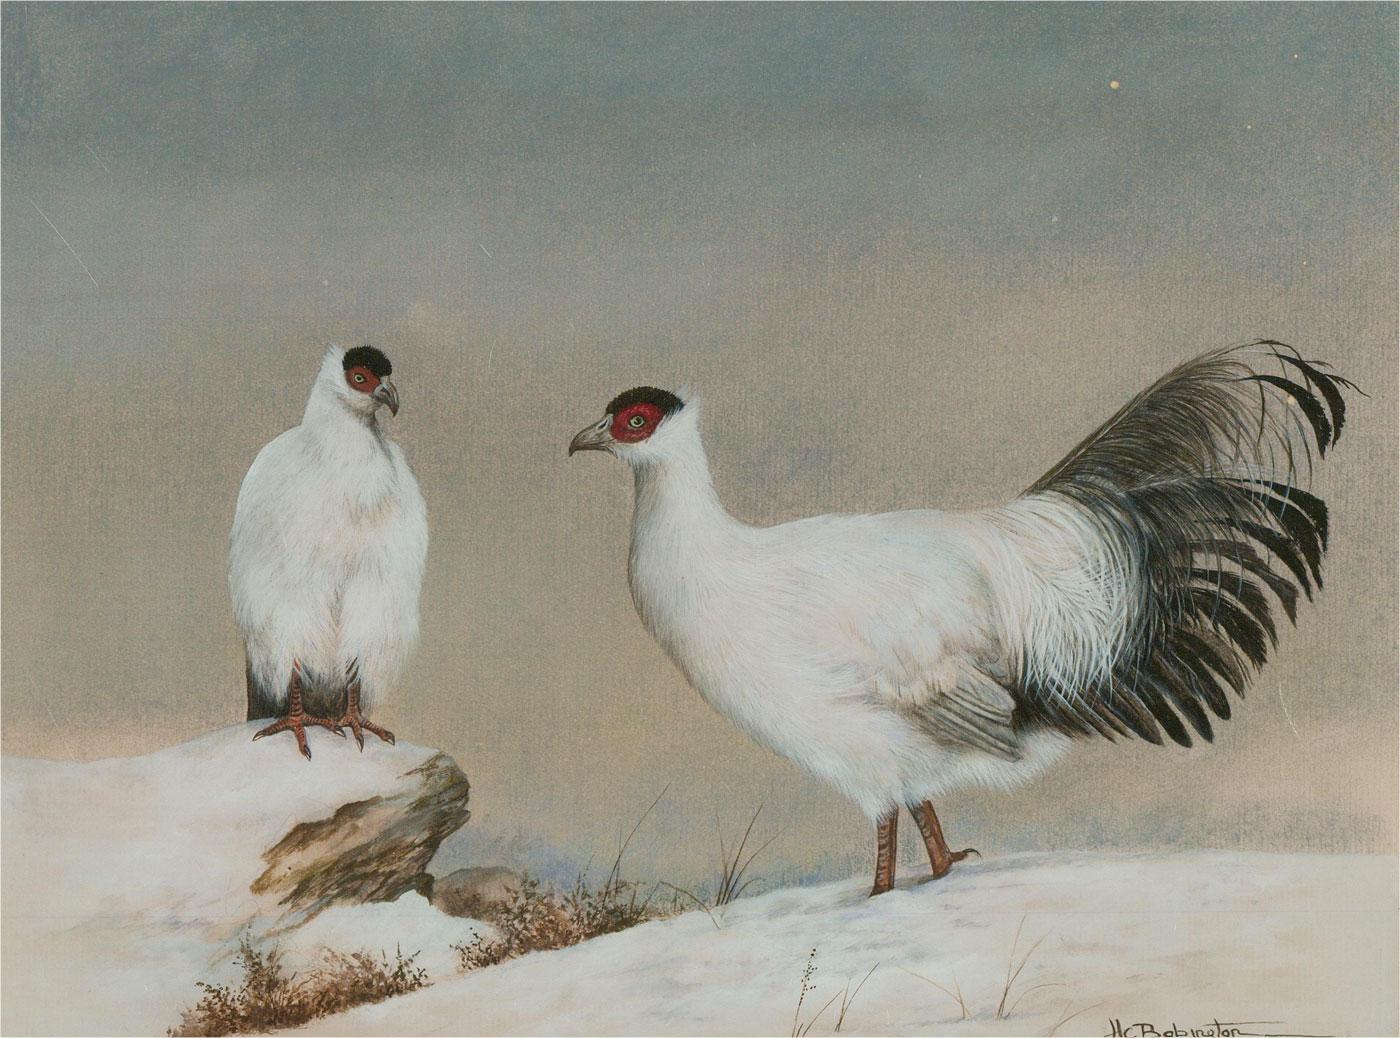 This charming study depicts two White Eared Pheasants in the snow. The artist has captured the bird's intricate feathers in fine detail. With gouache body colour. Signed to the lower right. Titled on the mount. Well presented in a part-gilt frame.